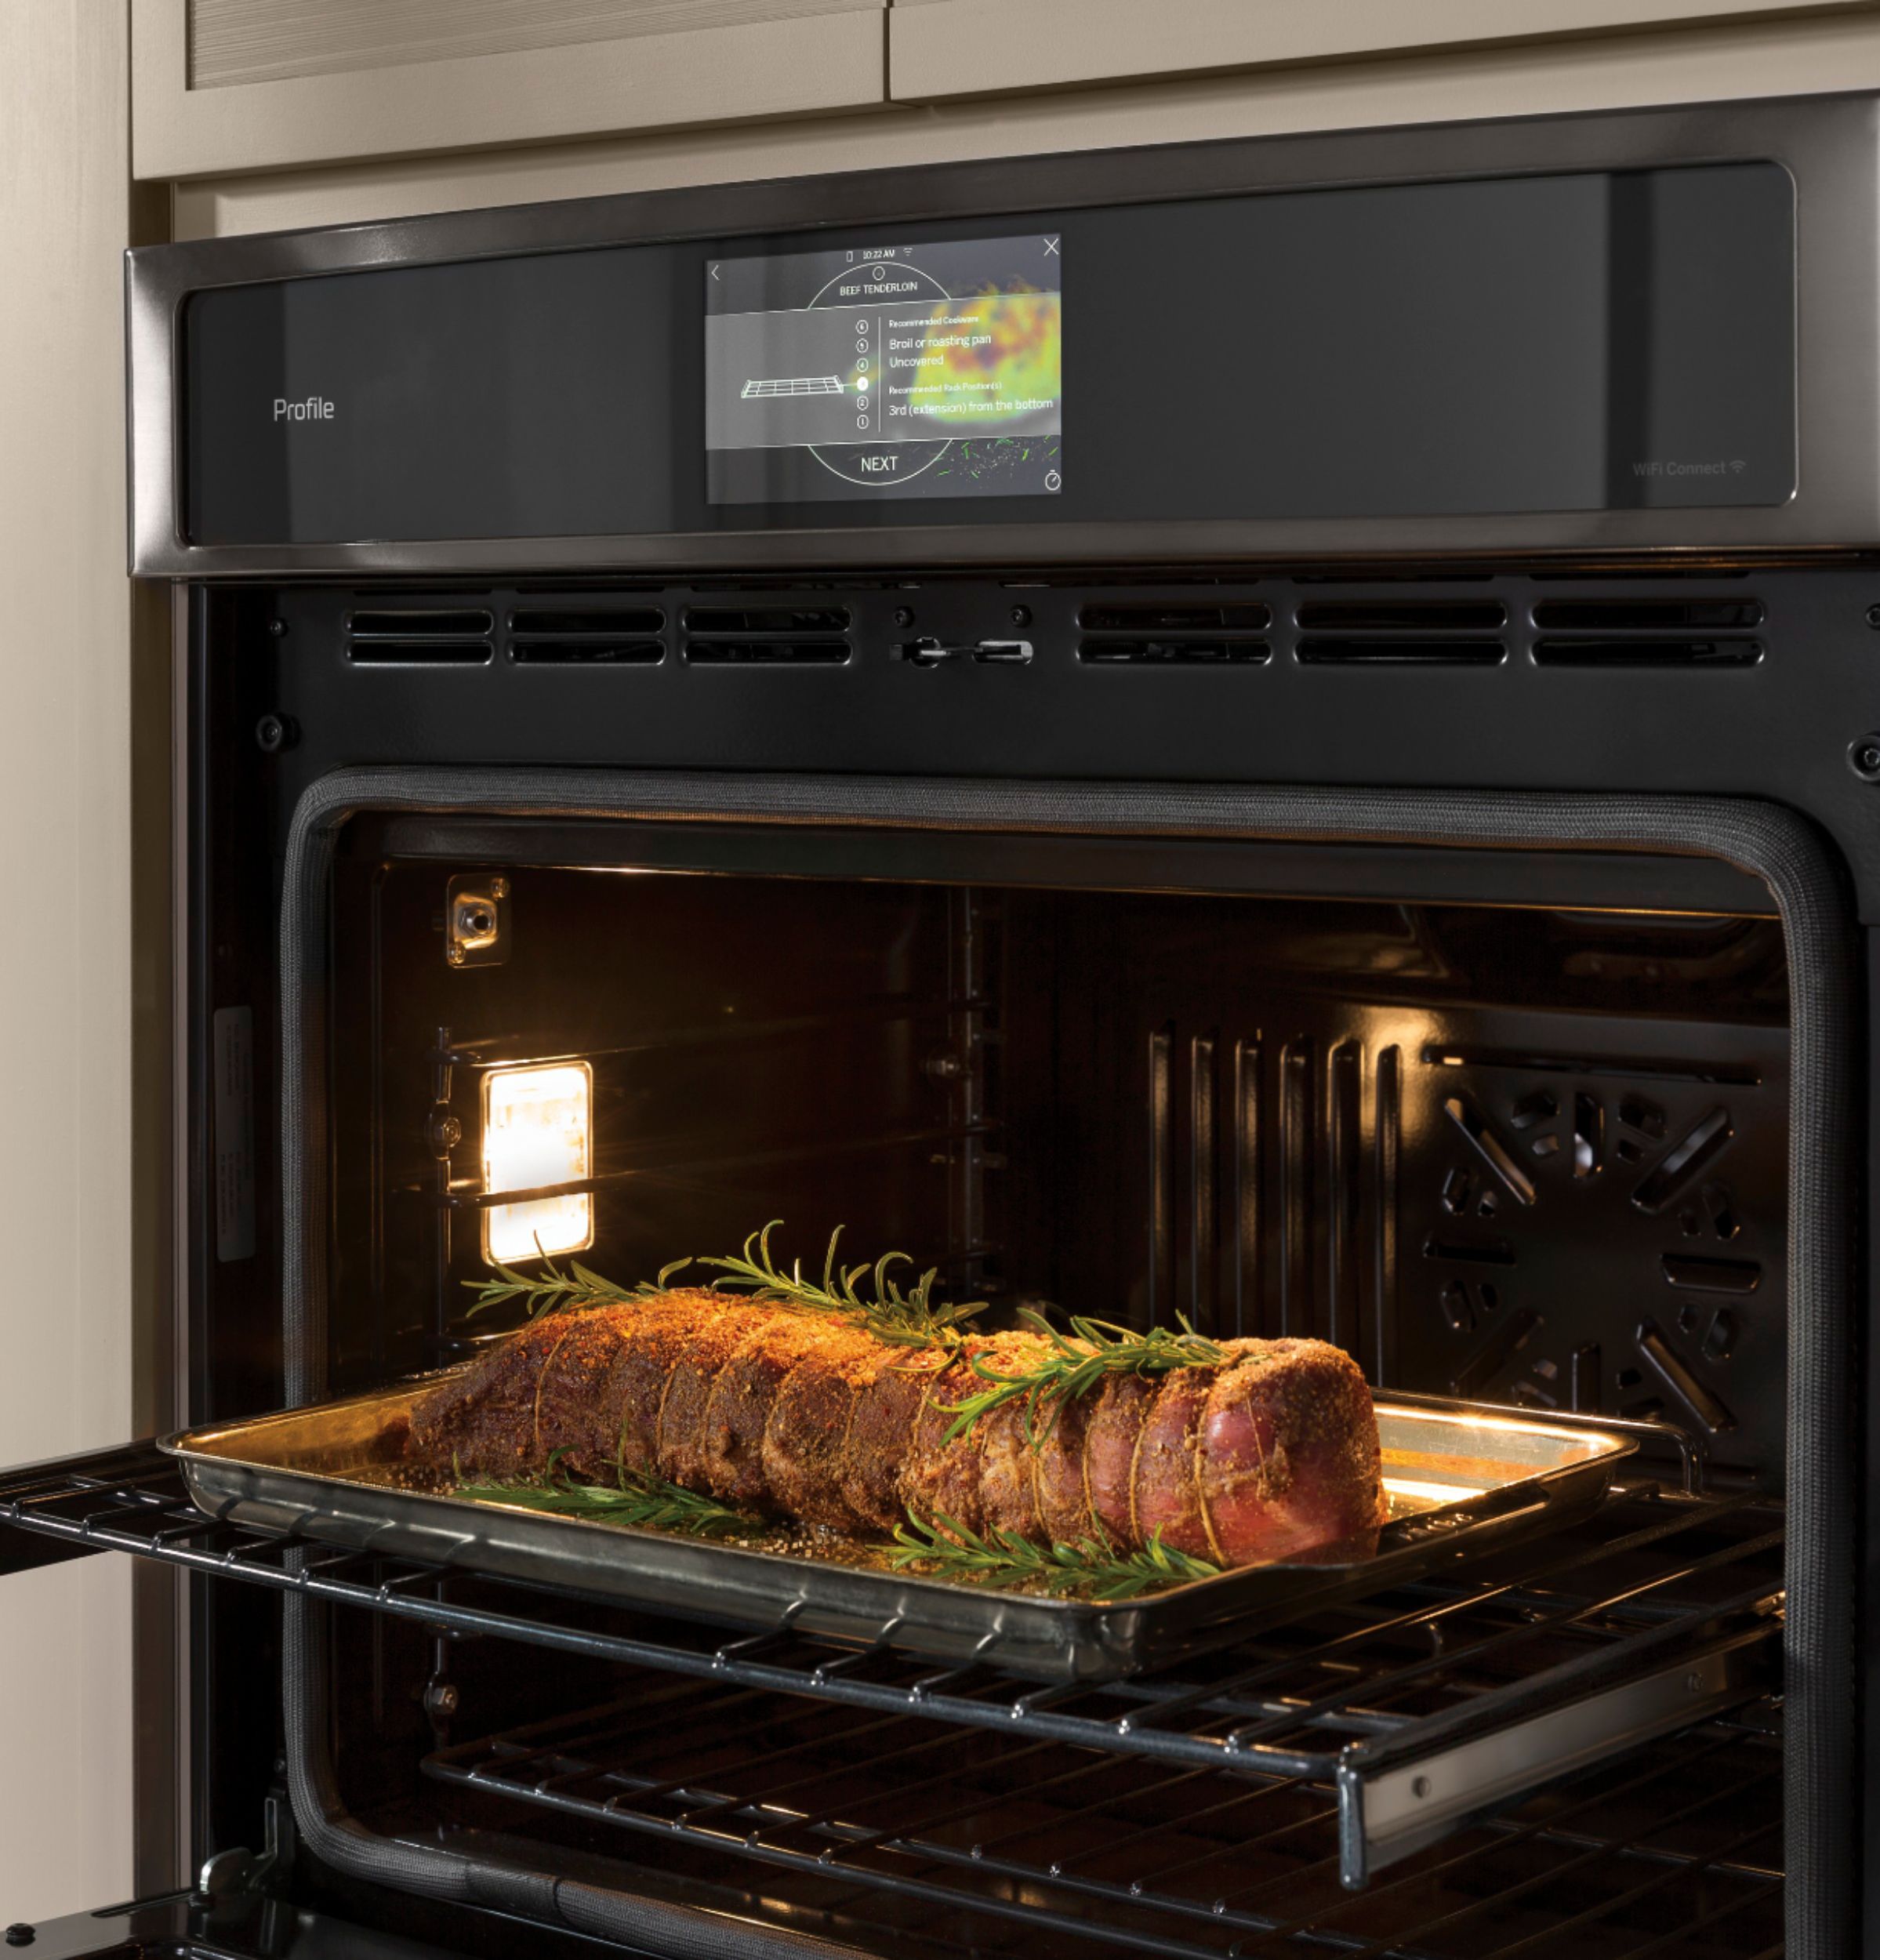 Best Buy: Café 30 Built-In Single Electric Convection Wall Oven CT9070SHSS